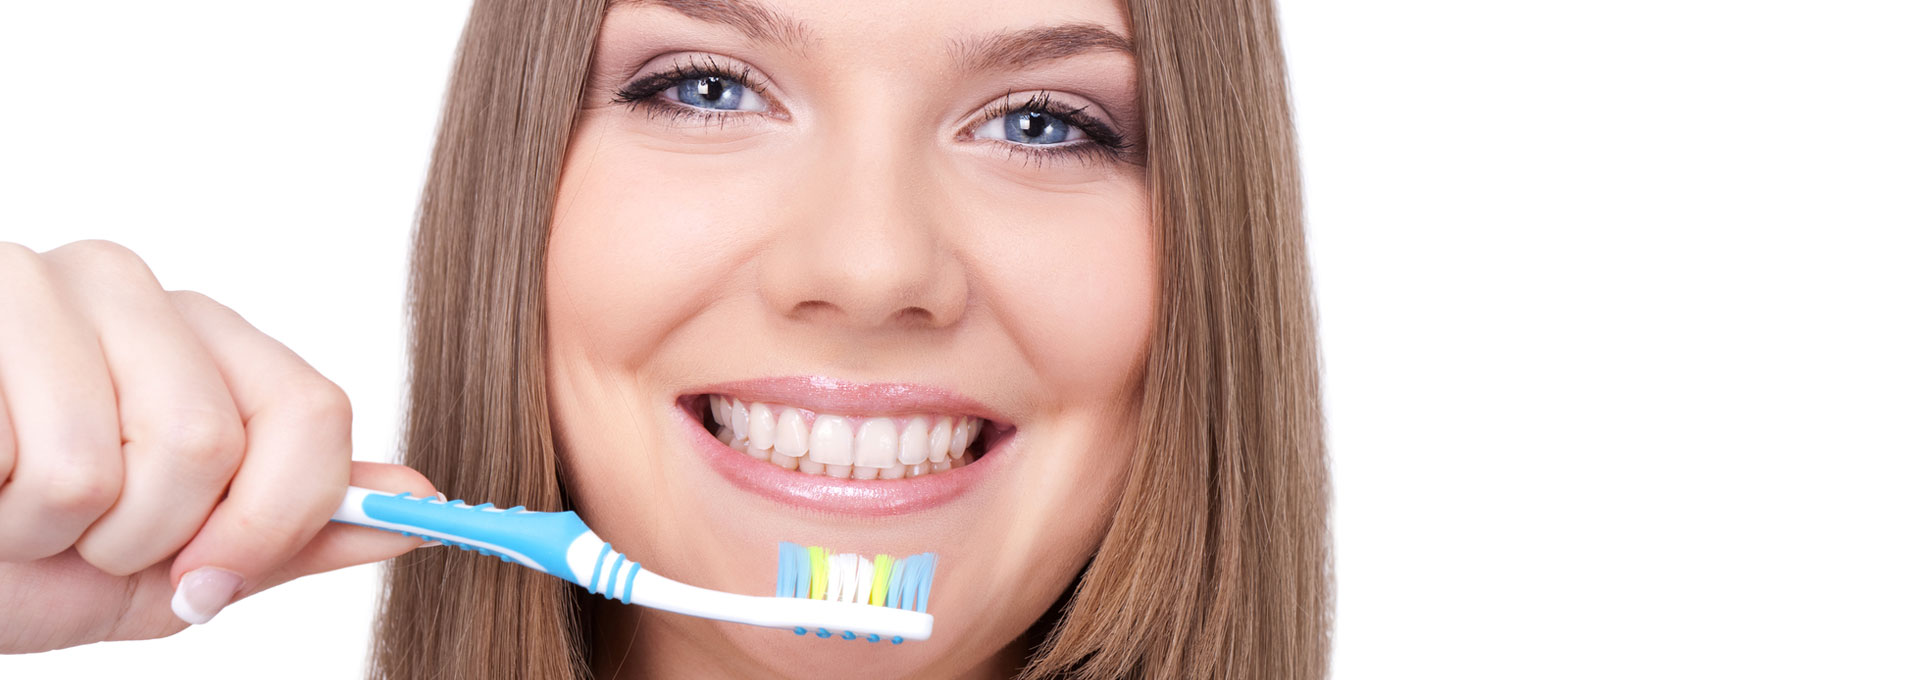 Smiling woman with great teeth holding tooth-brush